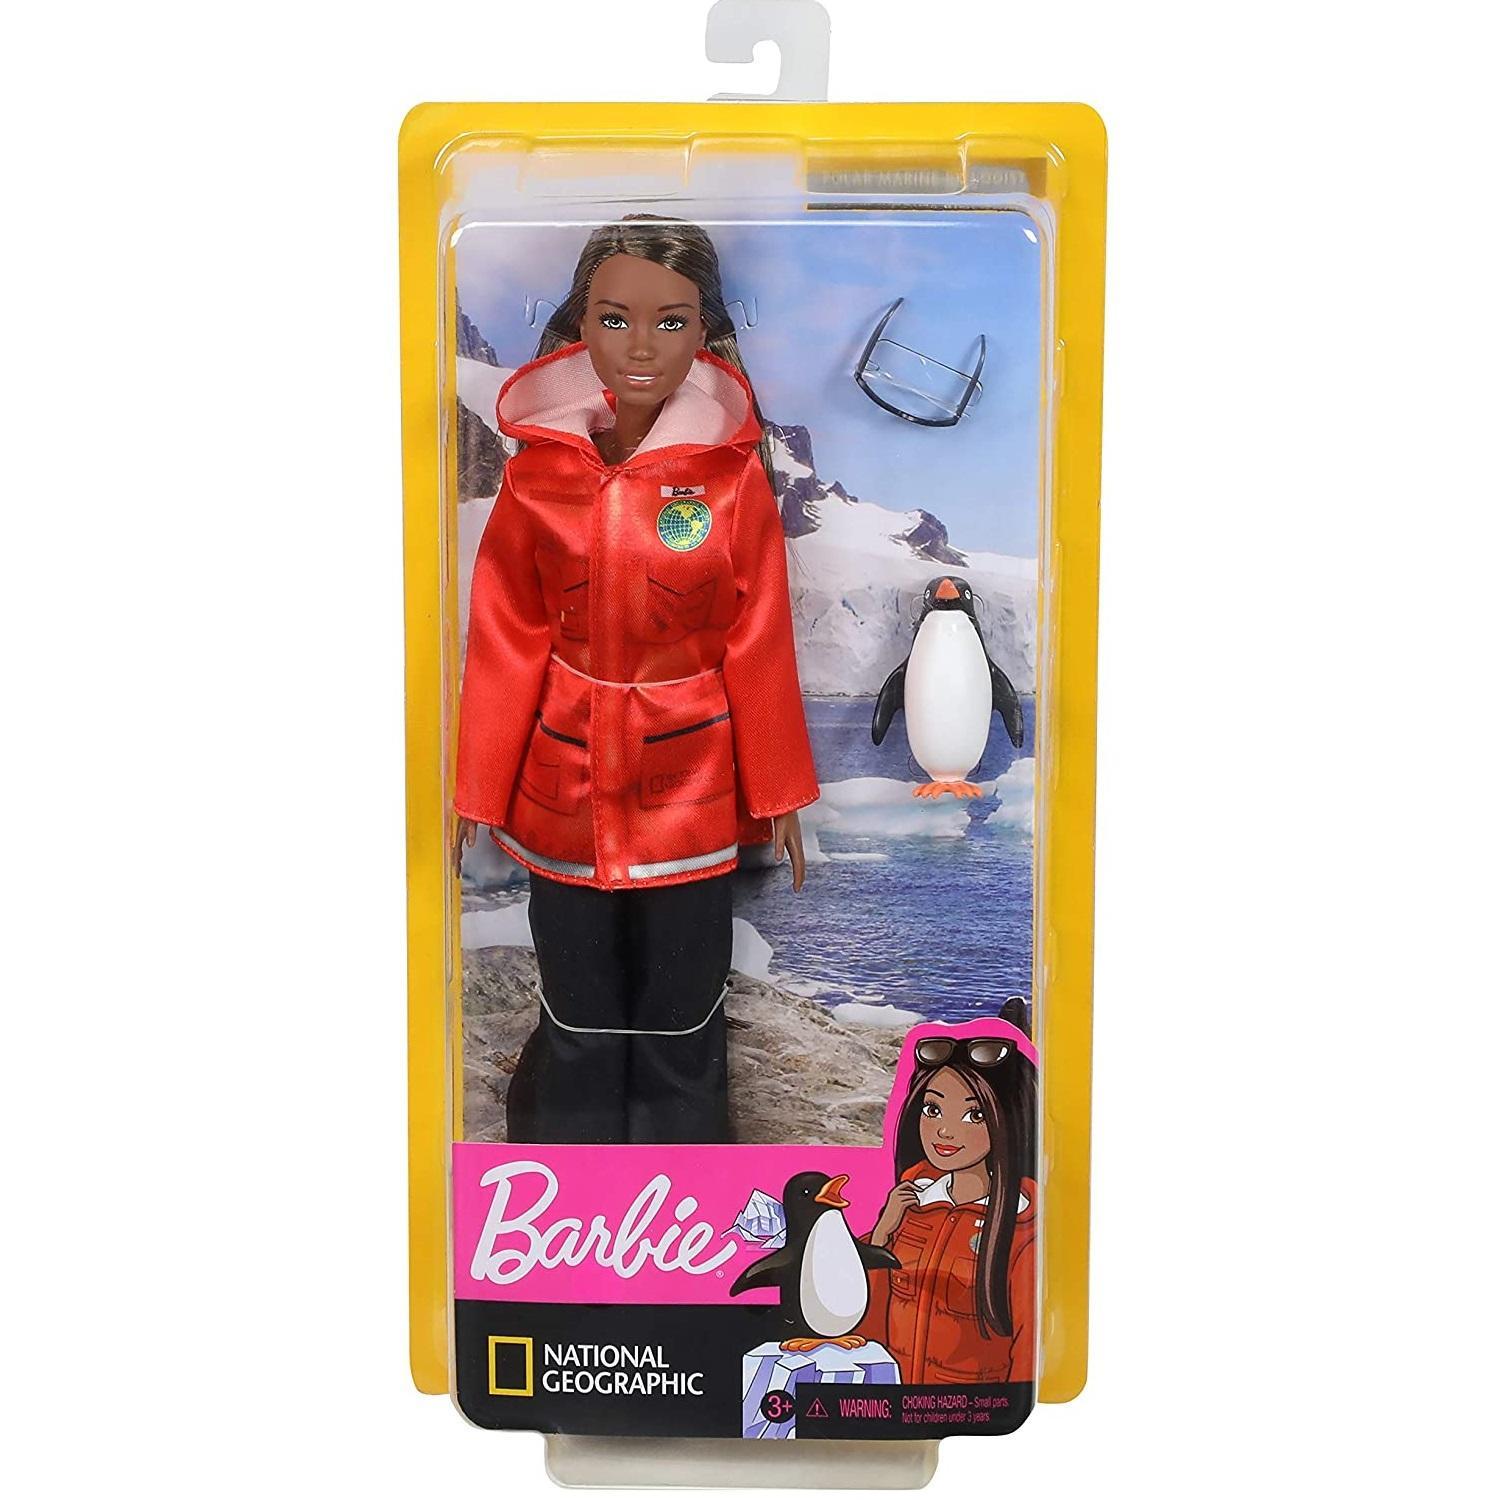 Barbie National Geographic Doll Assortment9